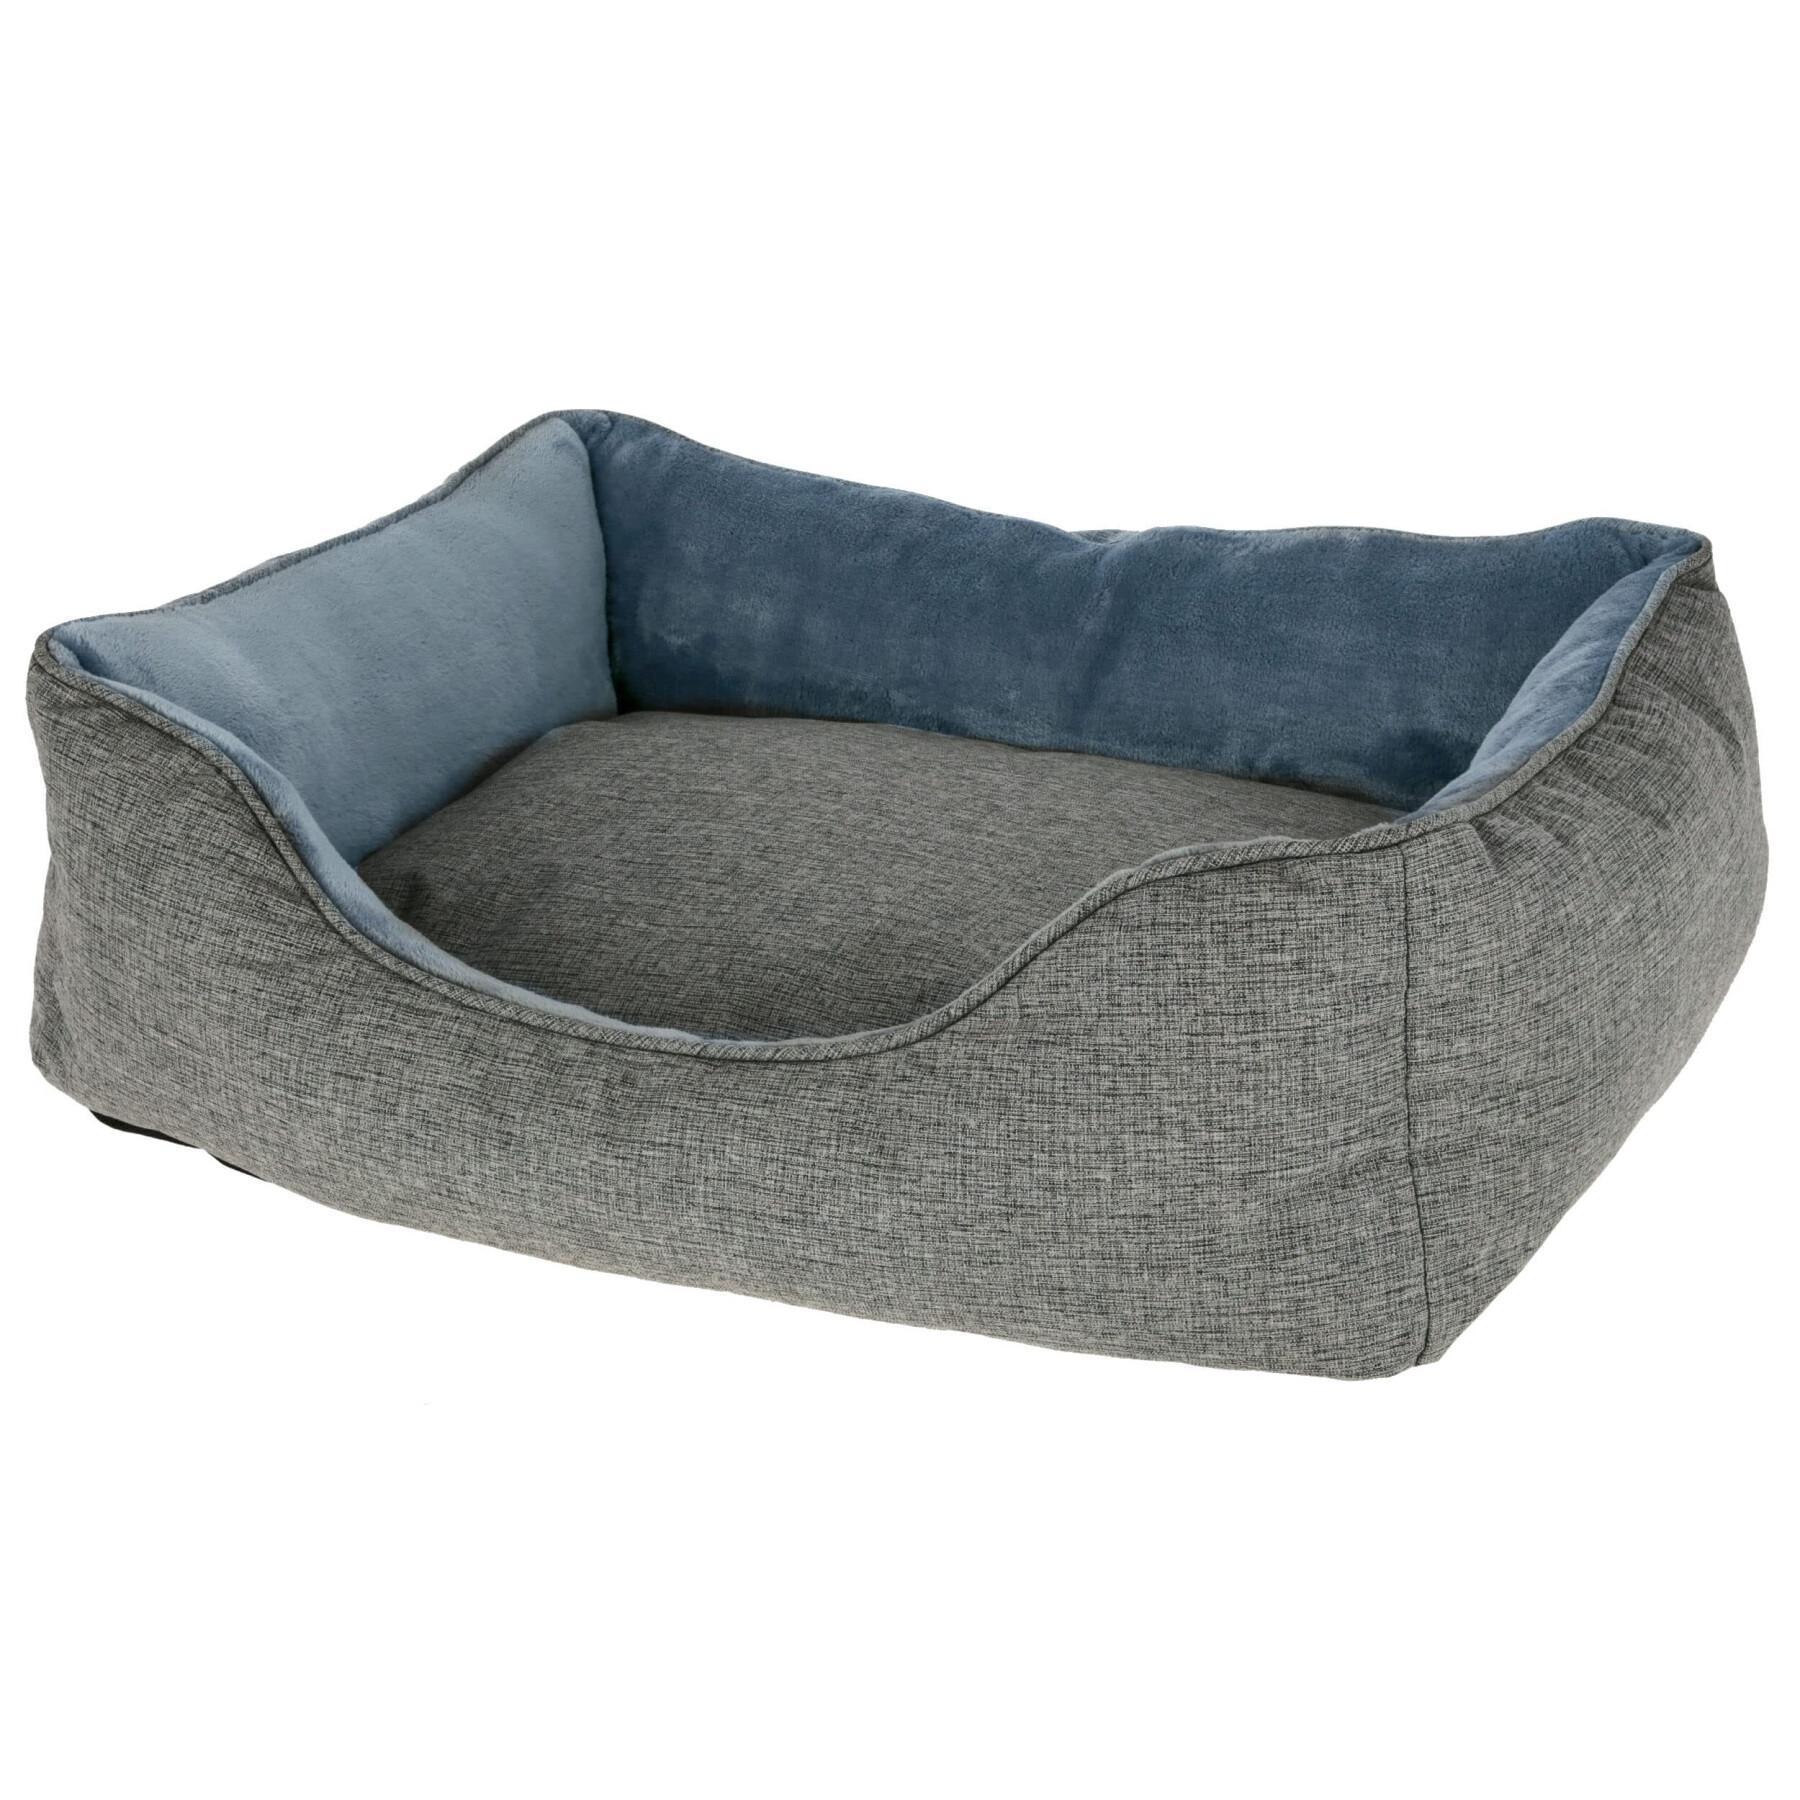 Cozy dog bed Kerbl Marie